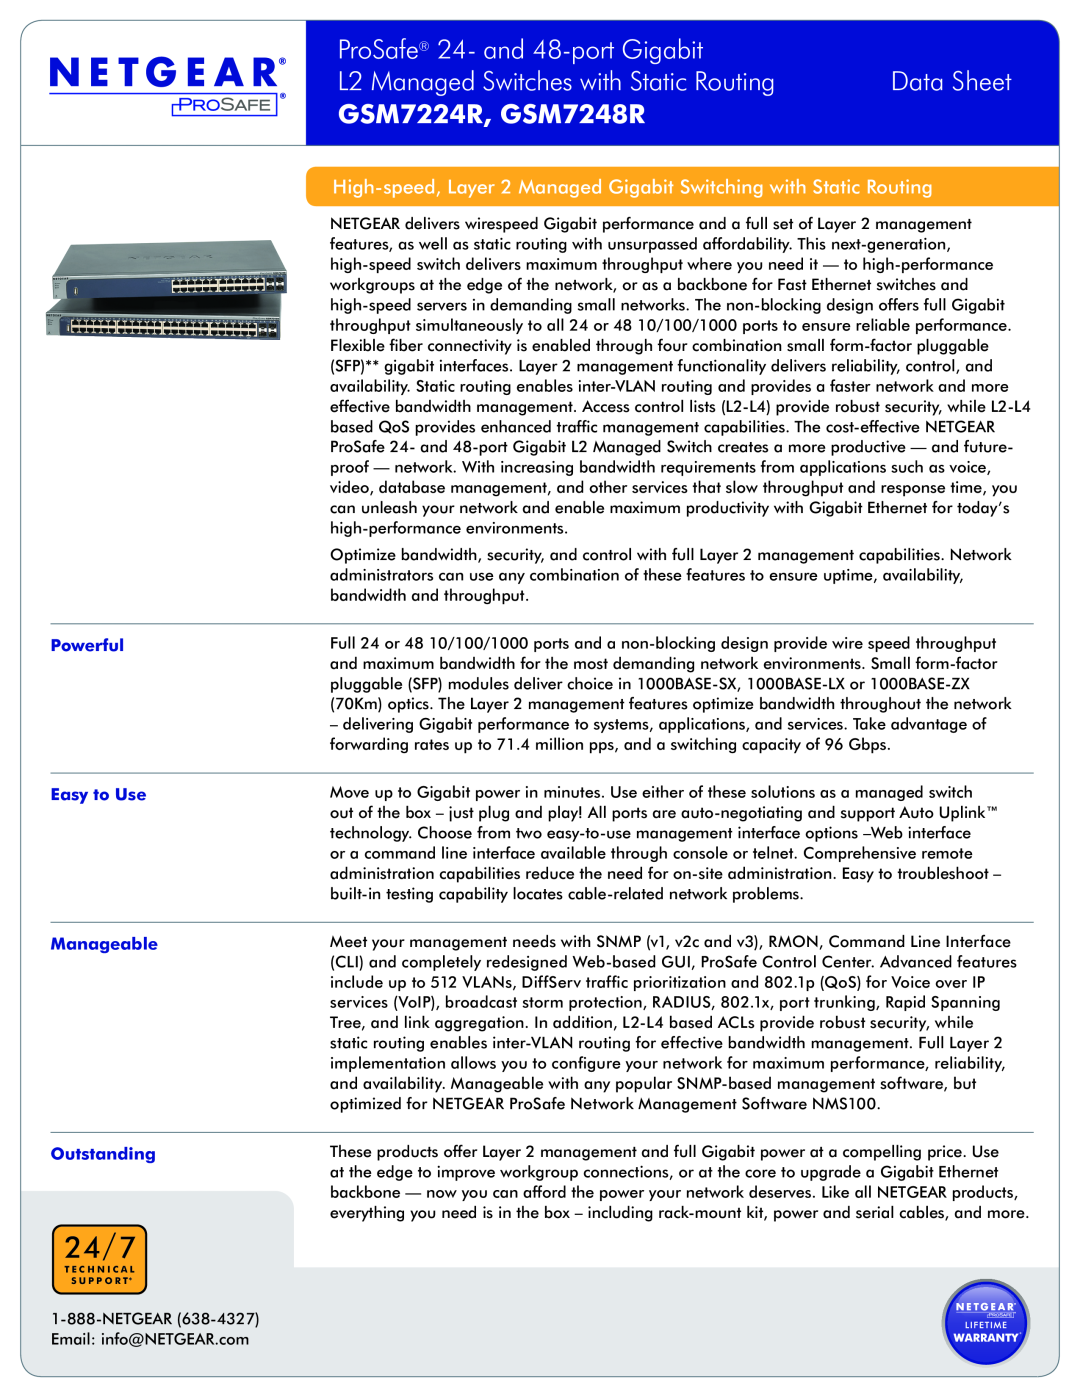 NETGEAR GSM7224R manual 24 /7, ProSafe 24- and 48-port Gigabit, L2 Managed Switches with Static Routing, Data Sheet 